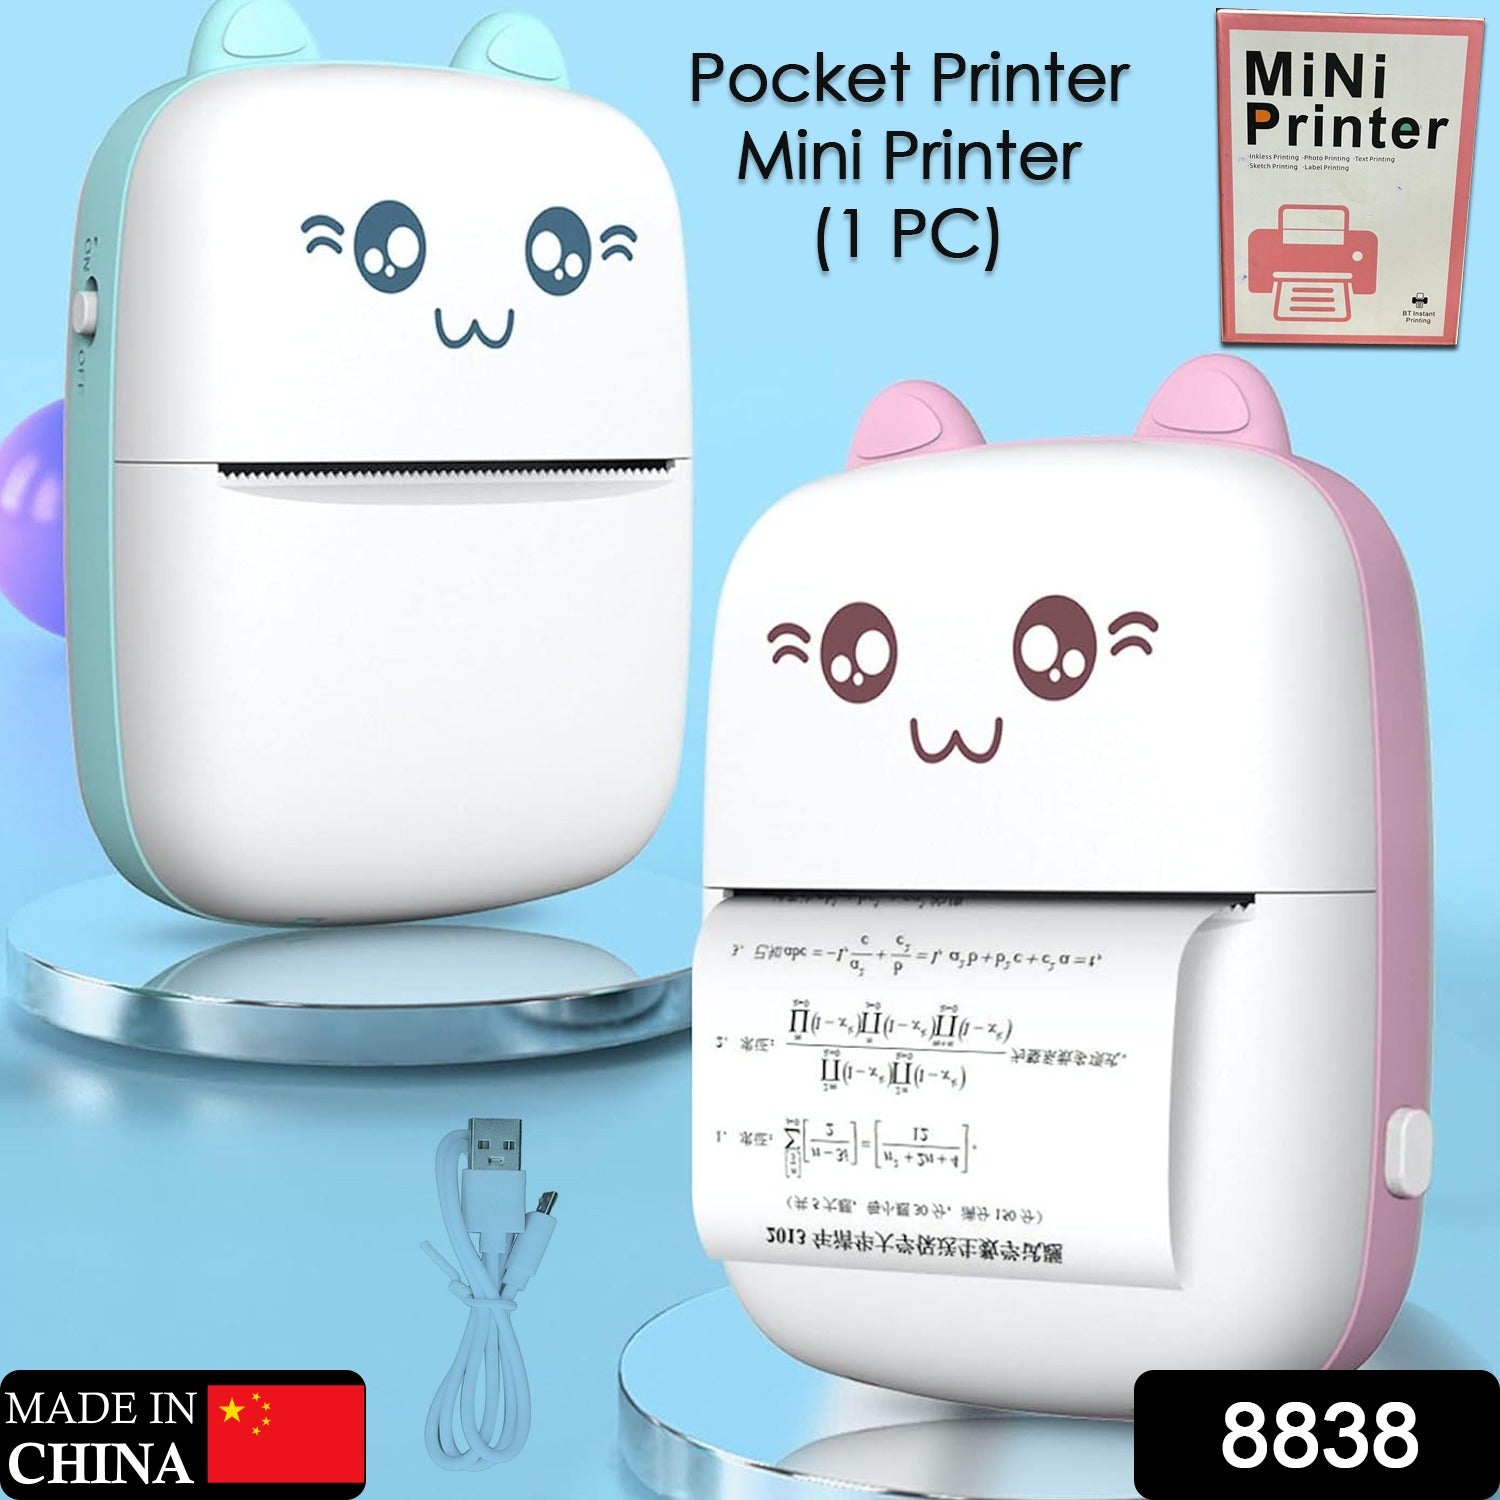 8838 Pocket Mini Printer, Mobile Phone Bluetooth Connection Wireless Mini Thermal Printer with Android or iOS APP for Pictures, Portable Smart Printer,Contains 1 Rolls Thermal Paper, with Fast Paper Output for Photo Image